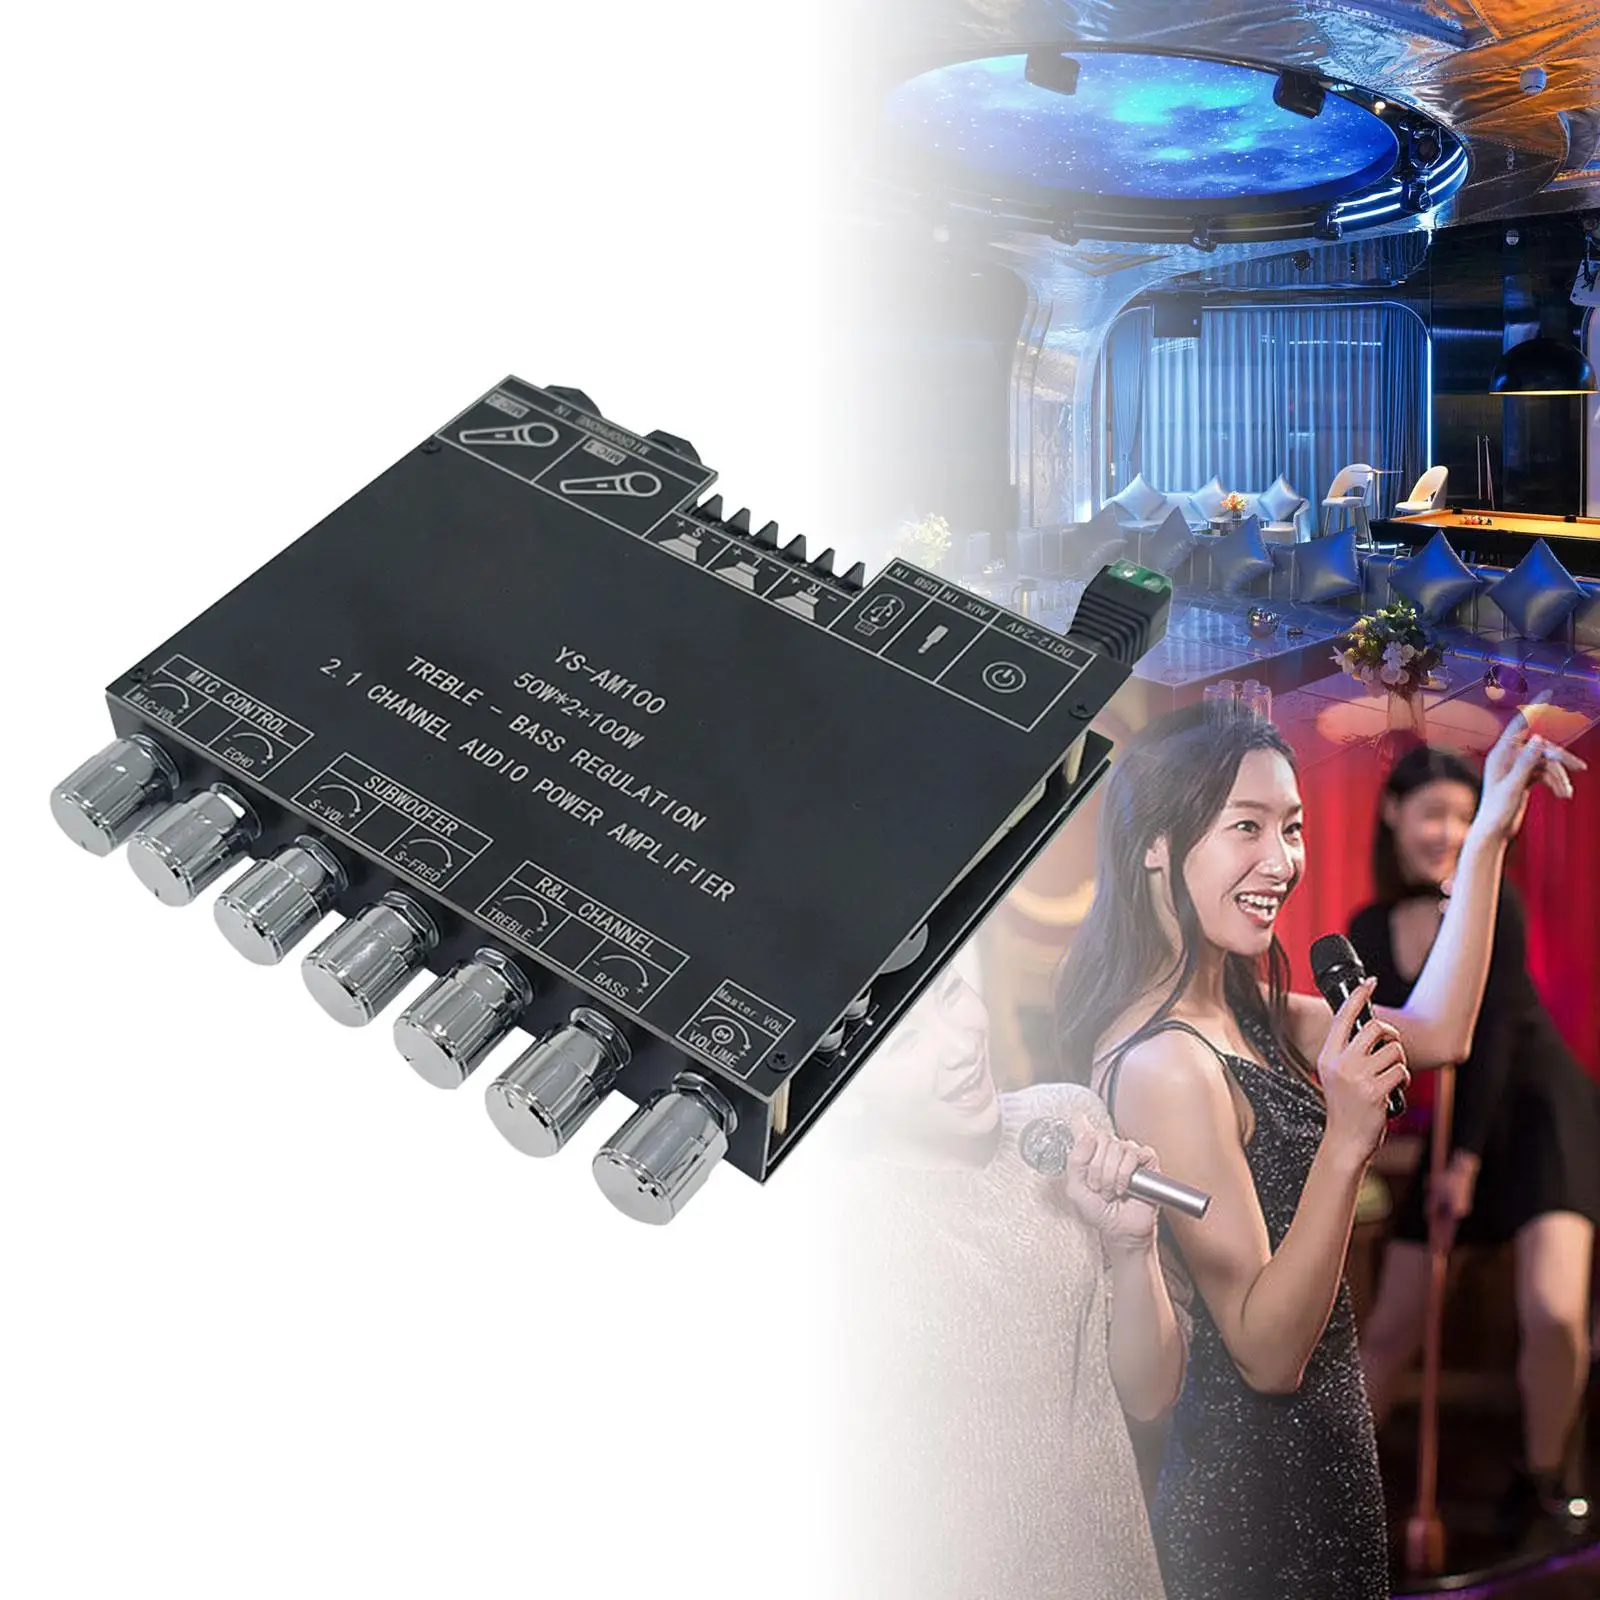 Power Amplifier Board Multifunction 2.1 Channel for Car Home Theater DIY